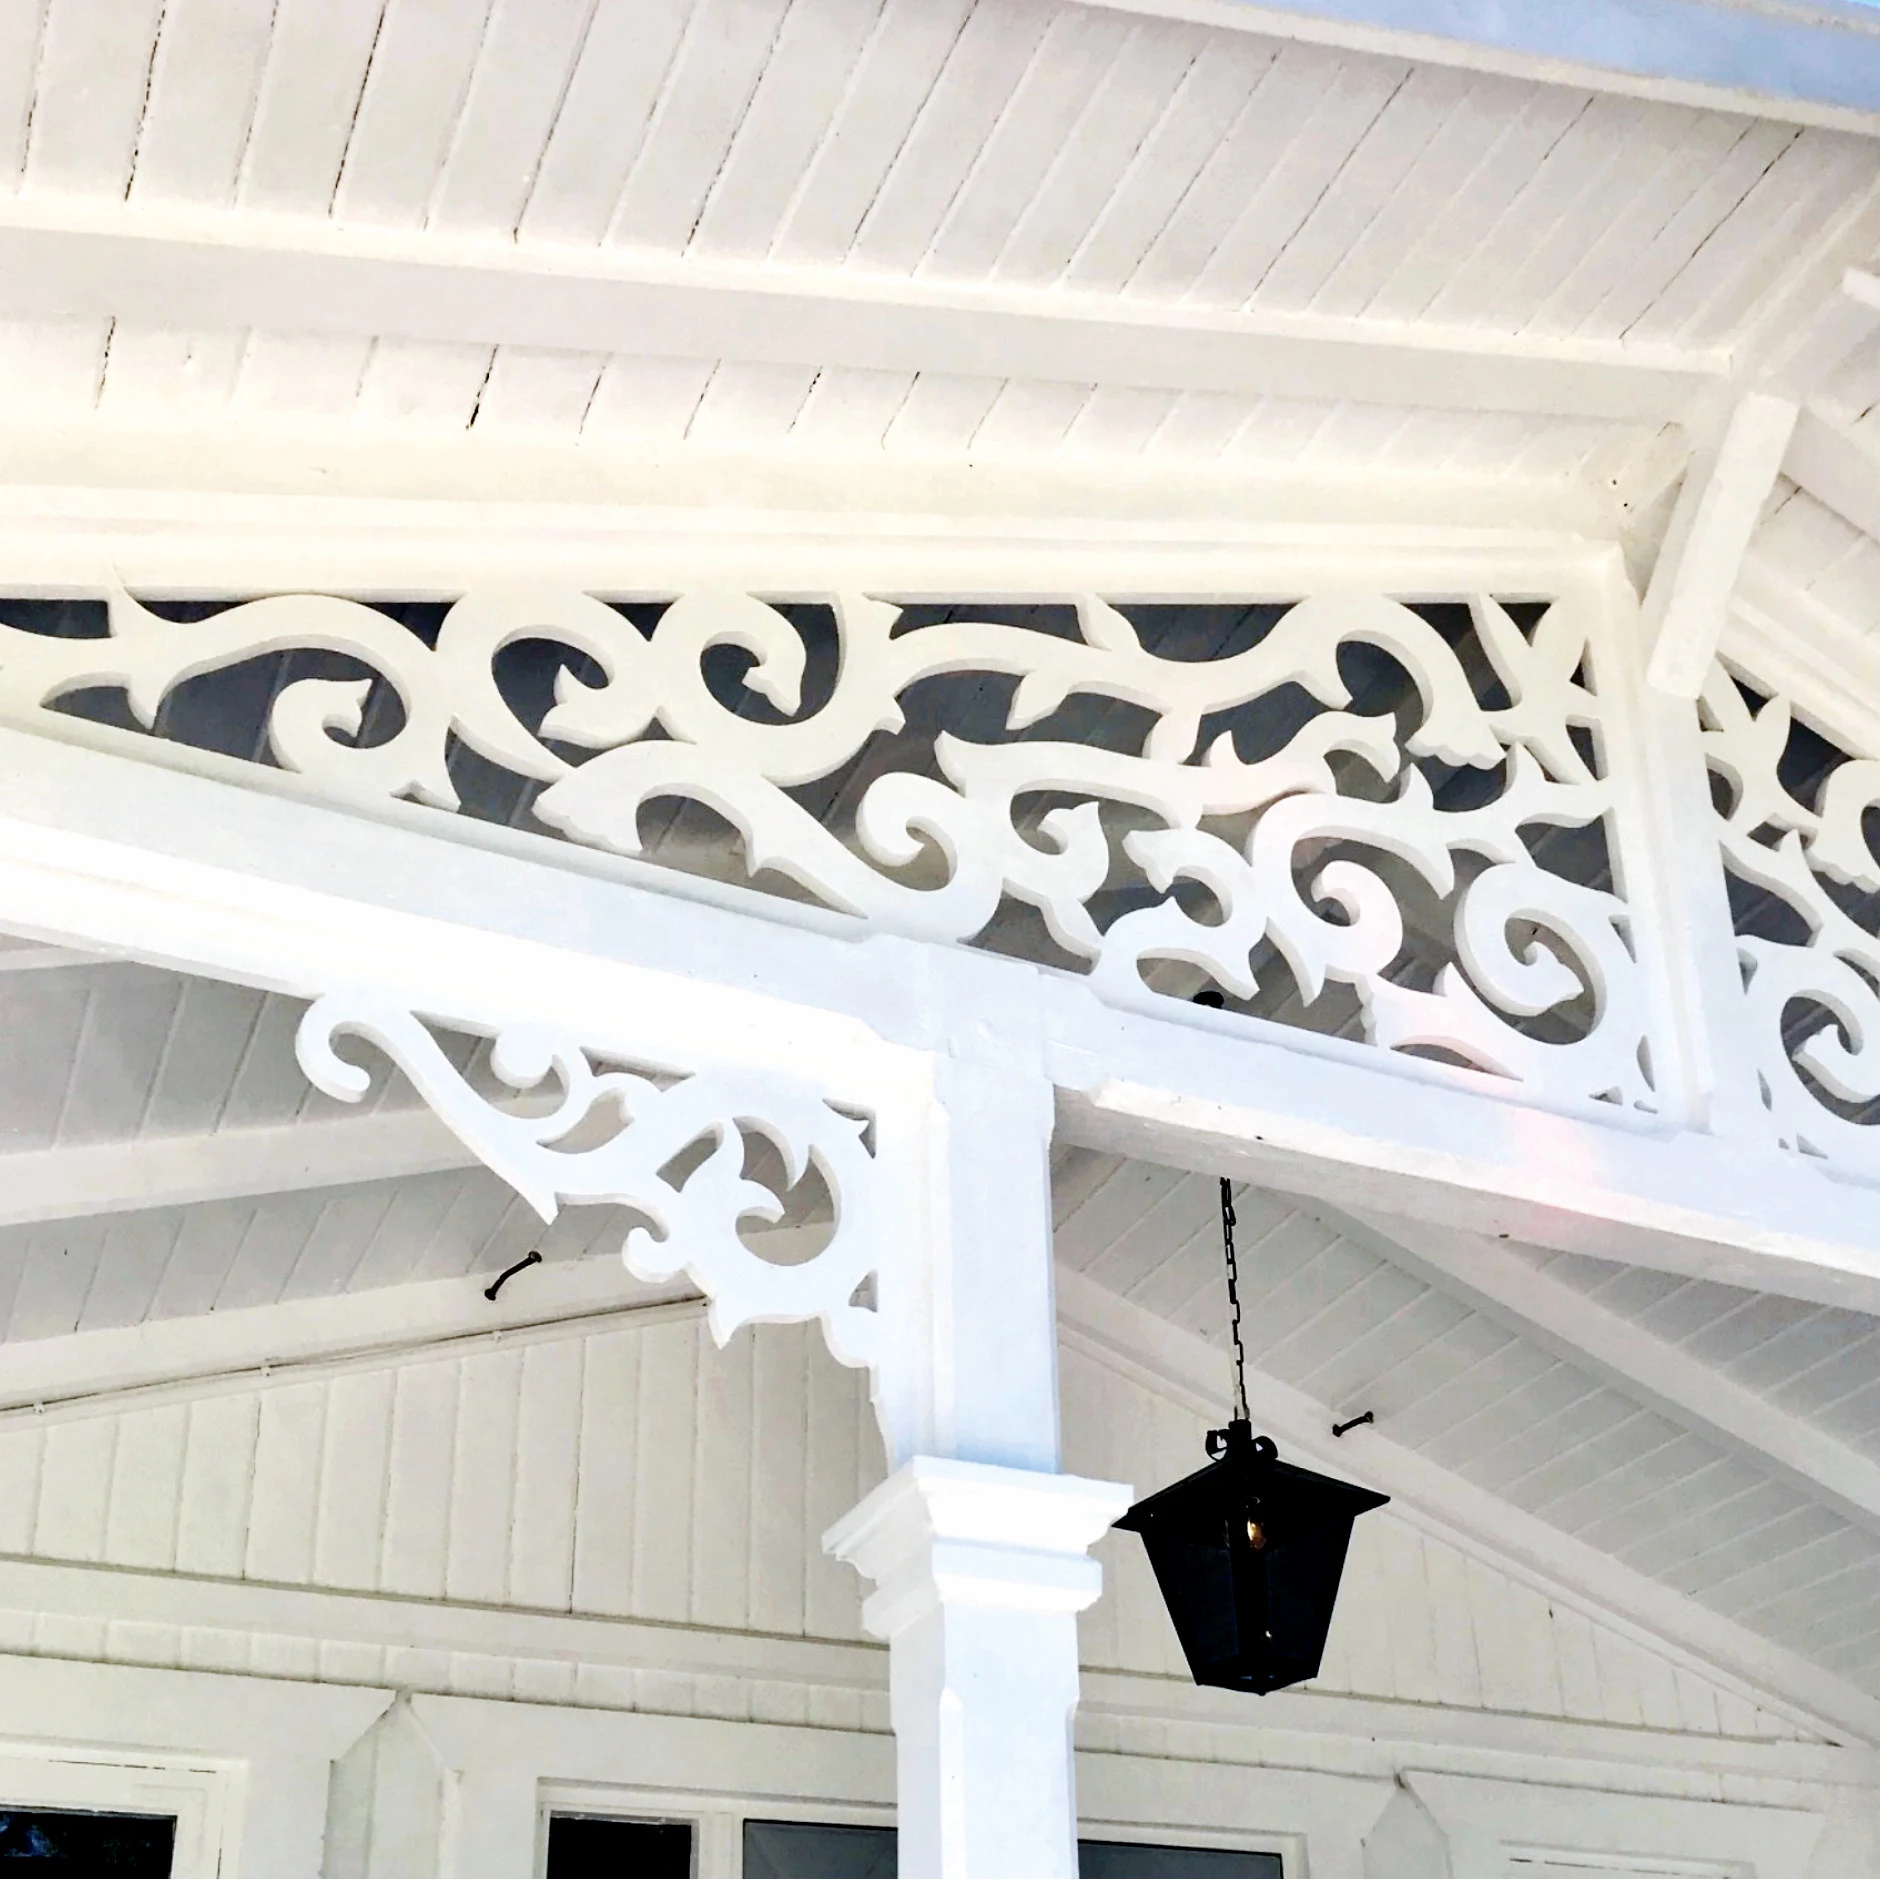 A white porch with carpentry joy, wooden brackets mounted outdoors adjacent to posts, and wooden ornaments in an old style inspired by the turn of the century, the 19th century.